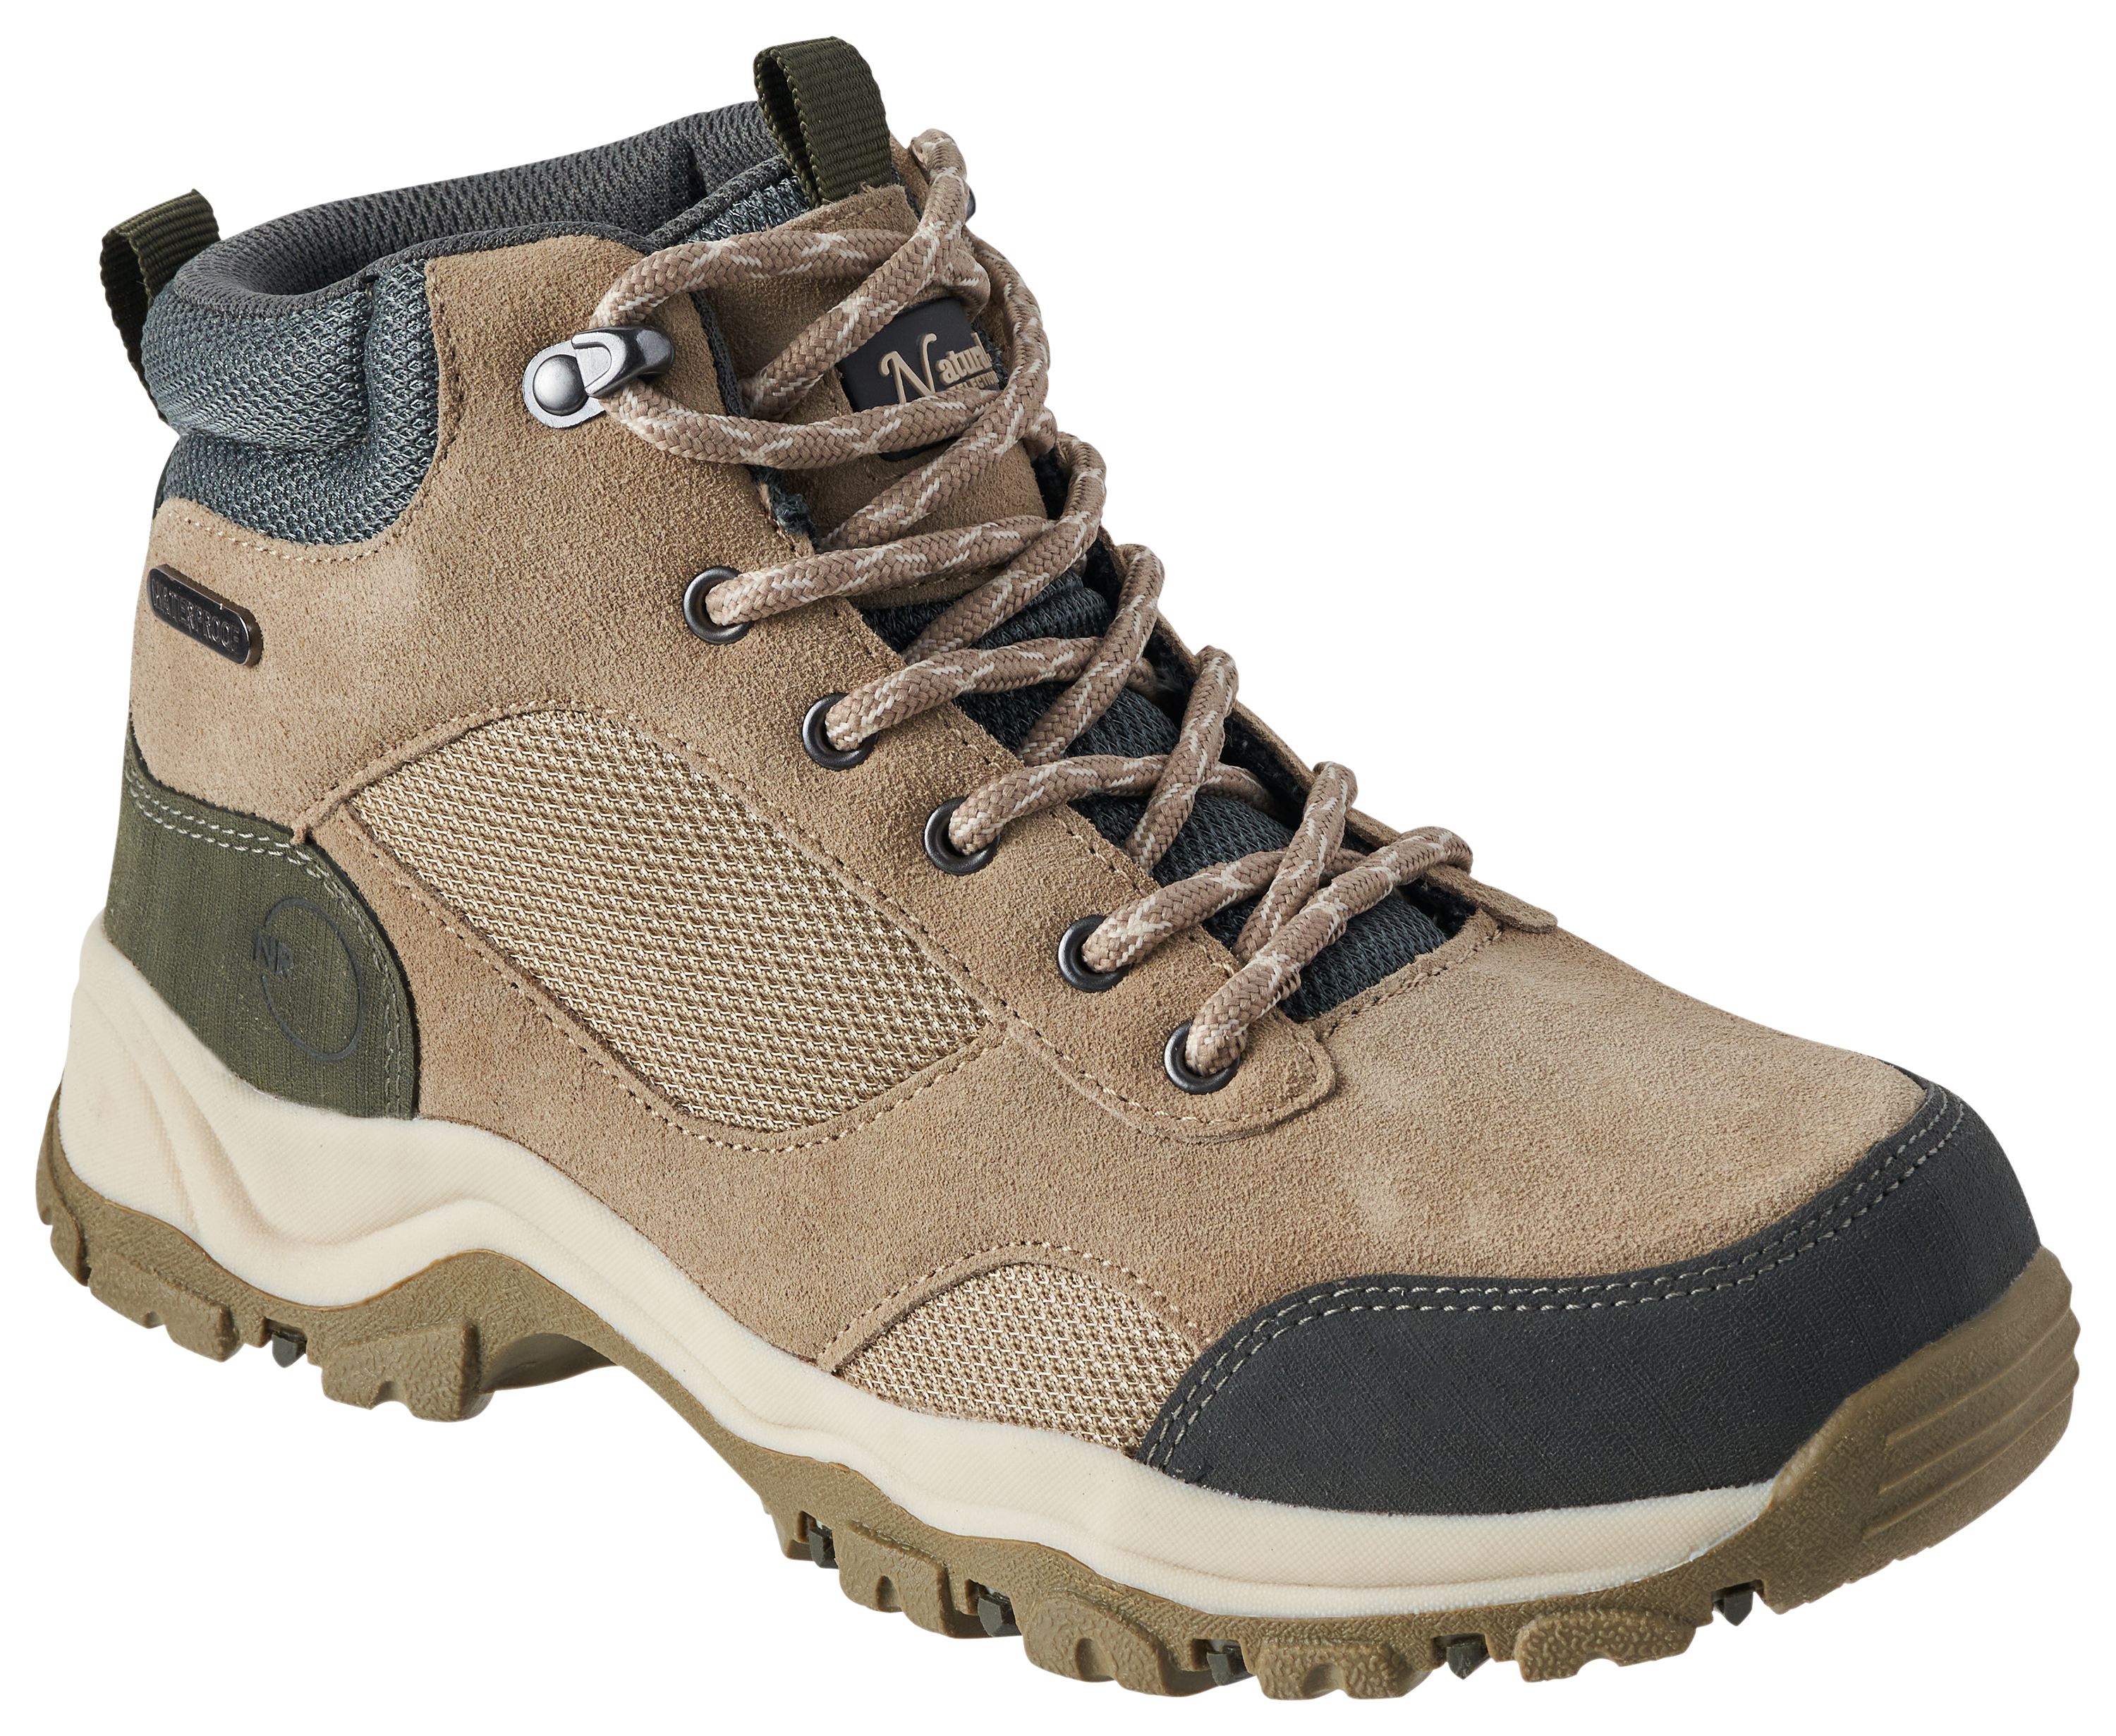 Natural Reflections Skyline II Mid Waterproof Hiking Boots for Ladies - Tan/Charcoal - 7M